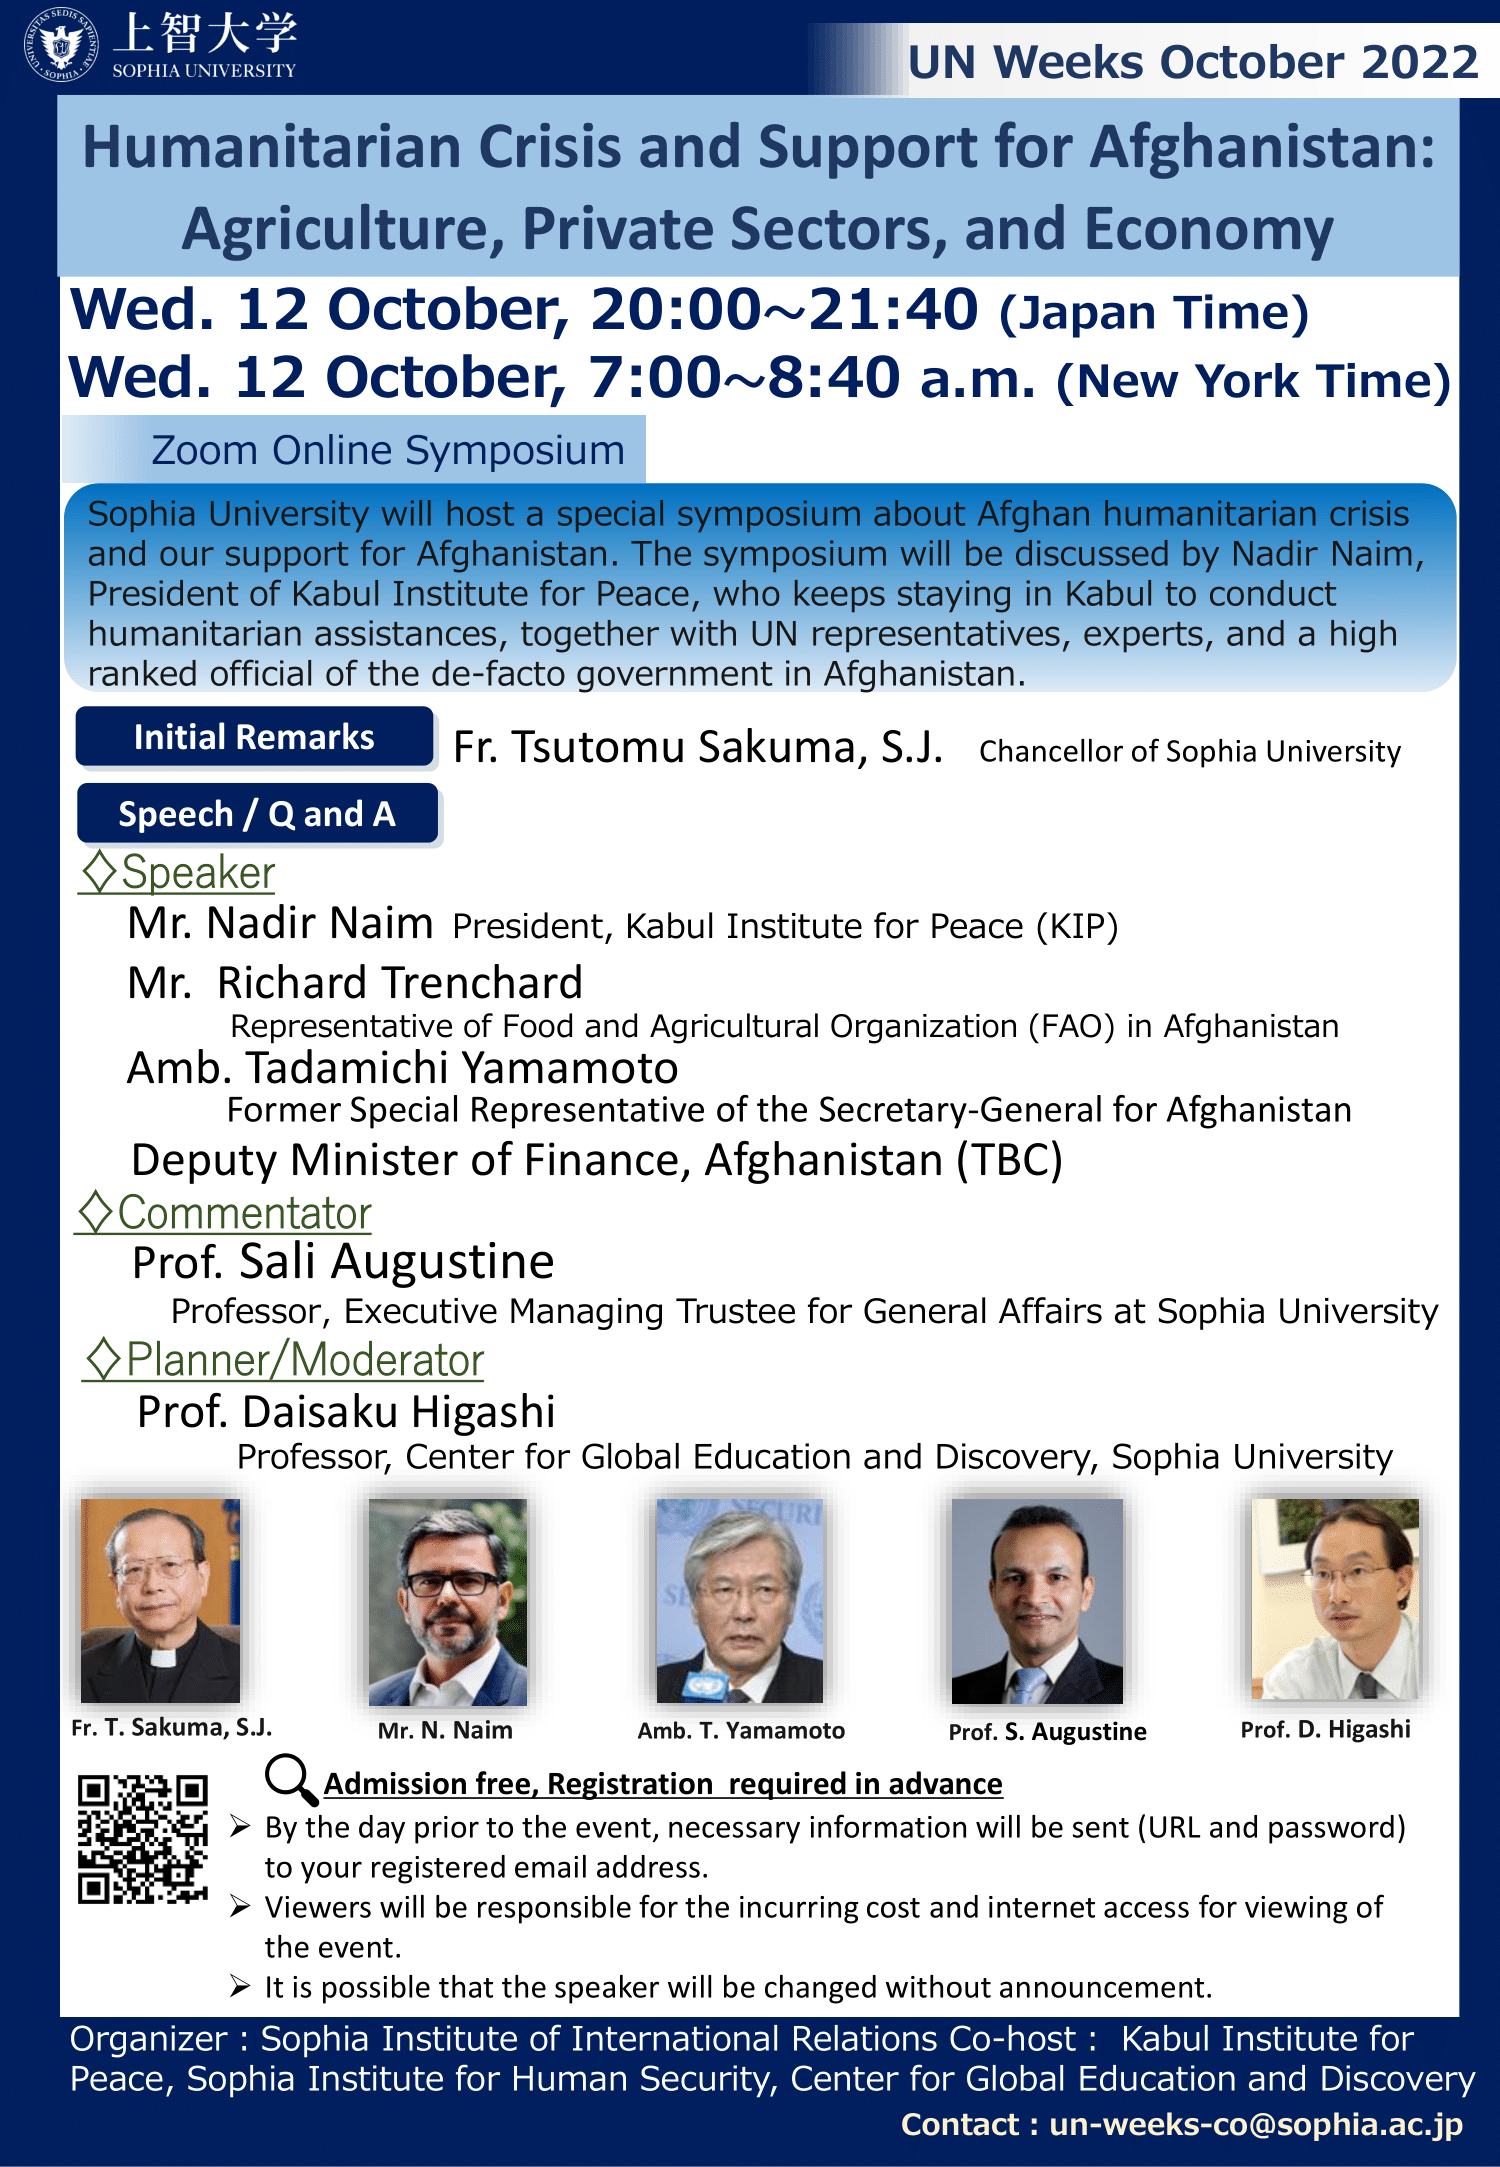 Humanitarian Crisis and Support for Afghanistan:Agriculture, Private Sectors, and Economy　Wed. 12 October, 20:00～21:40 (Japan Time)